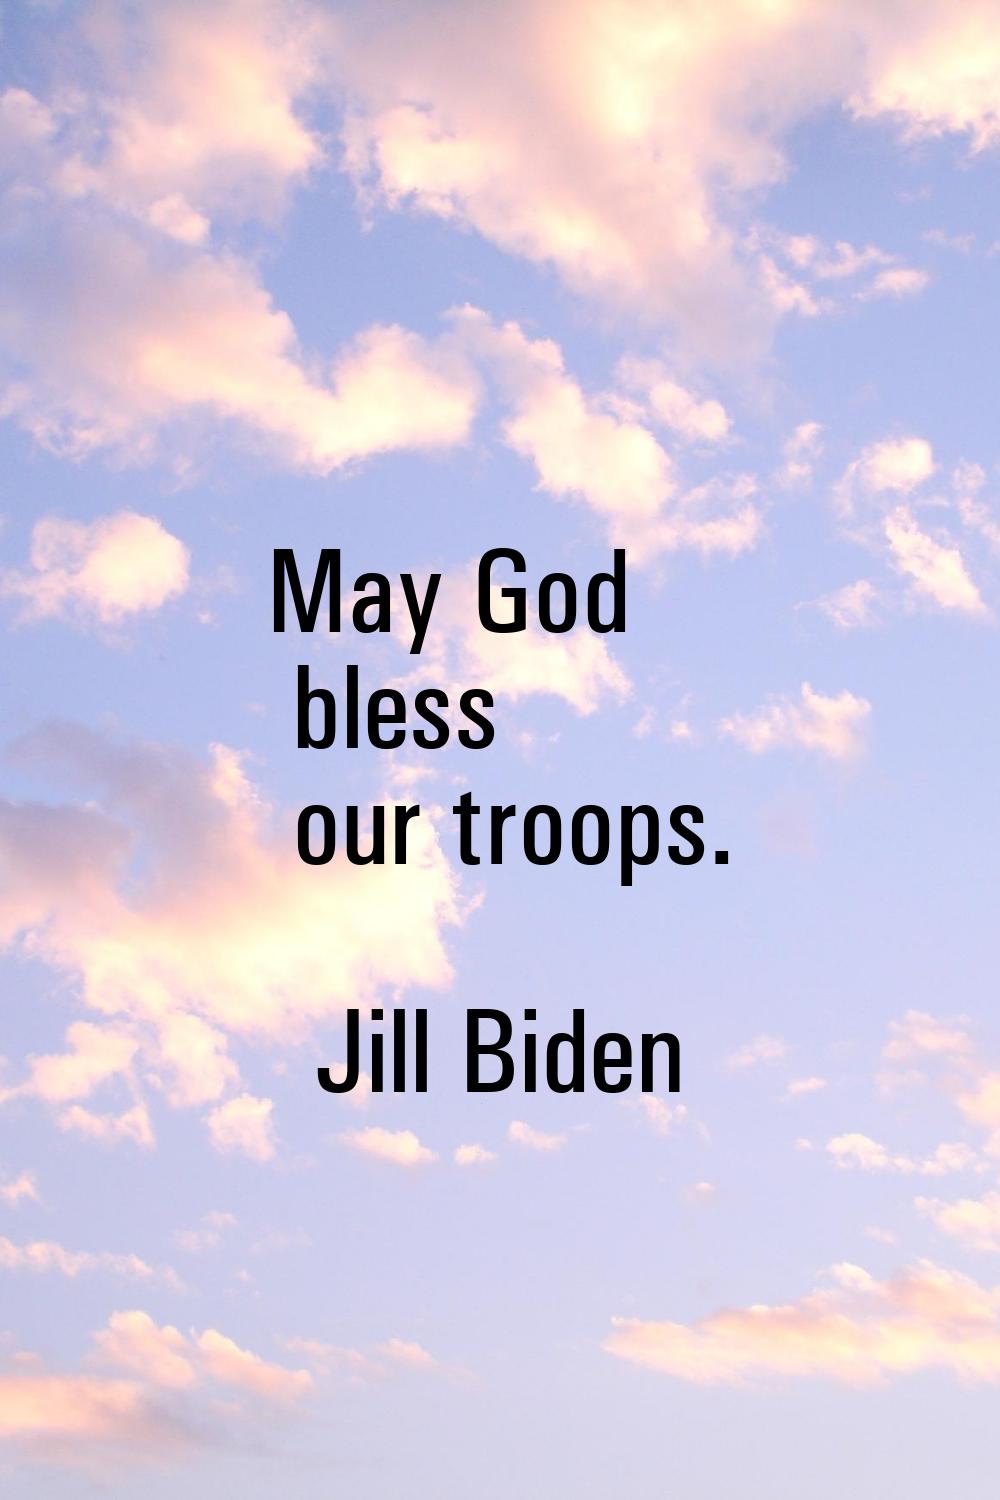 May God bless our troops.